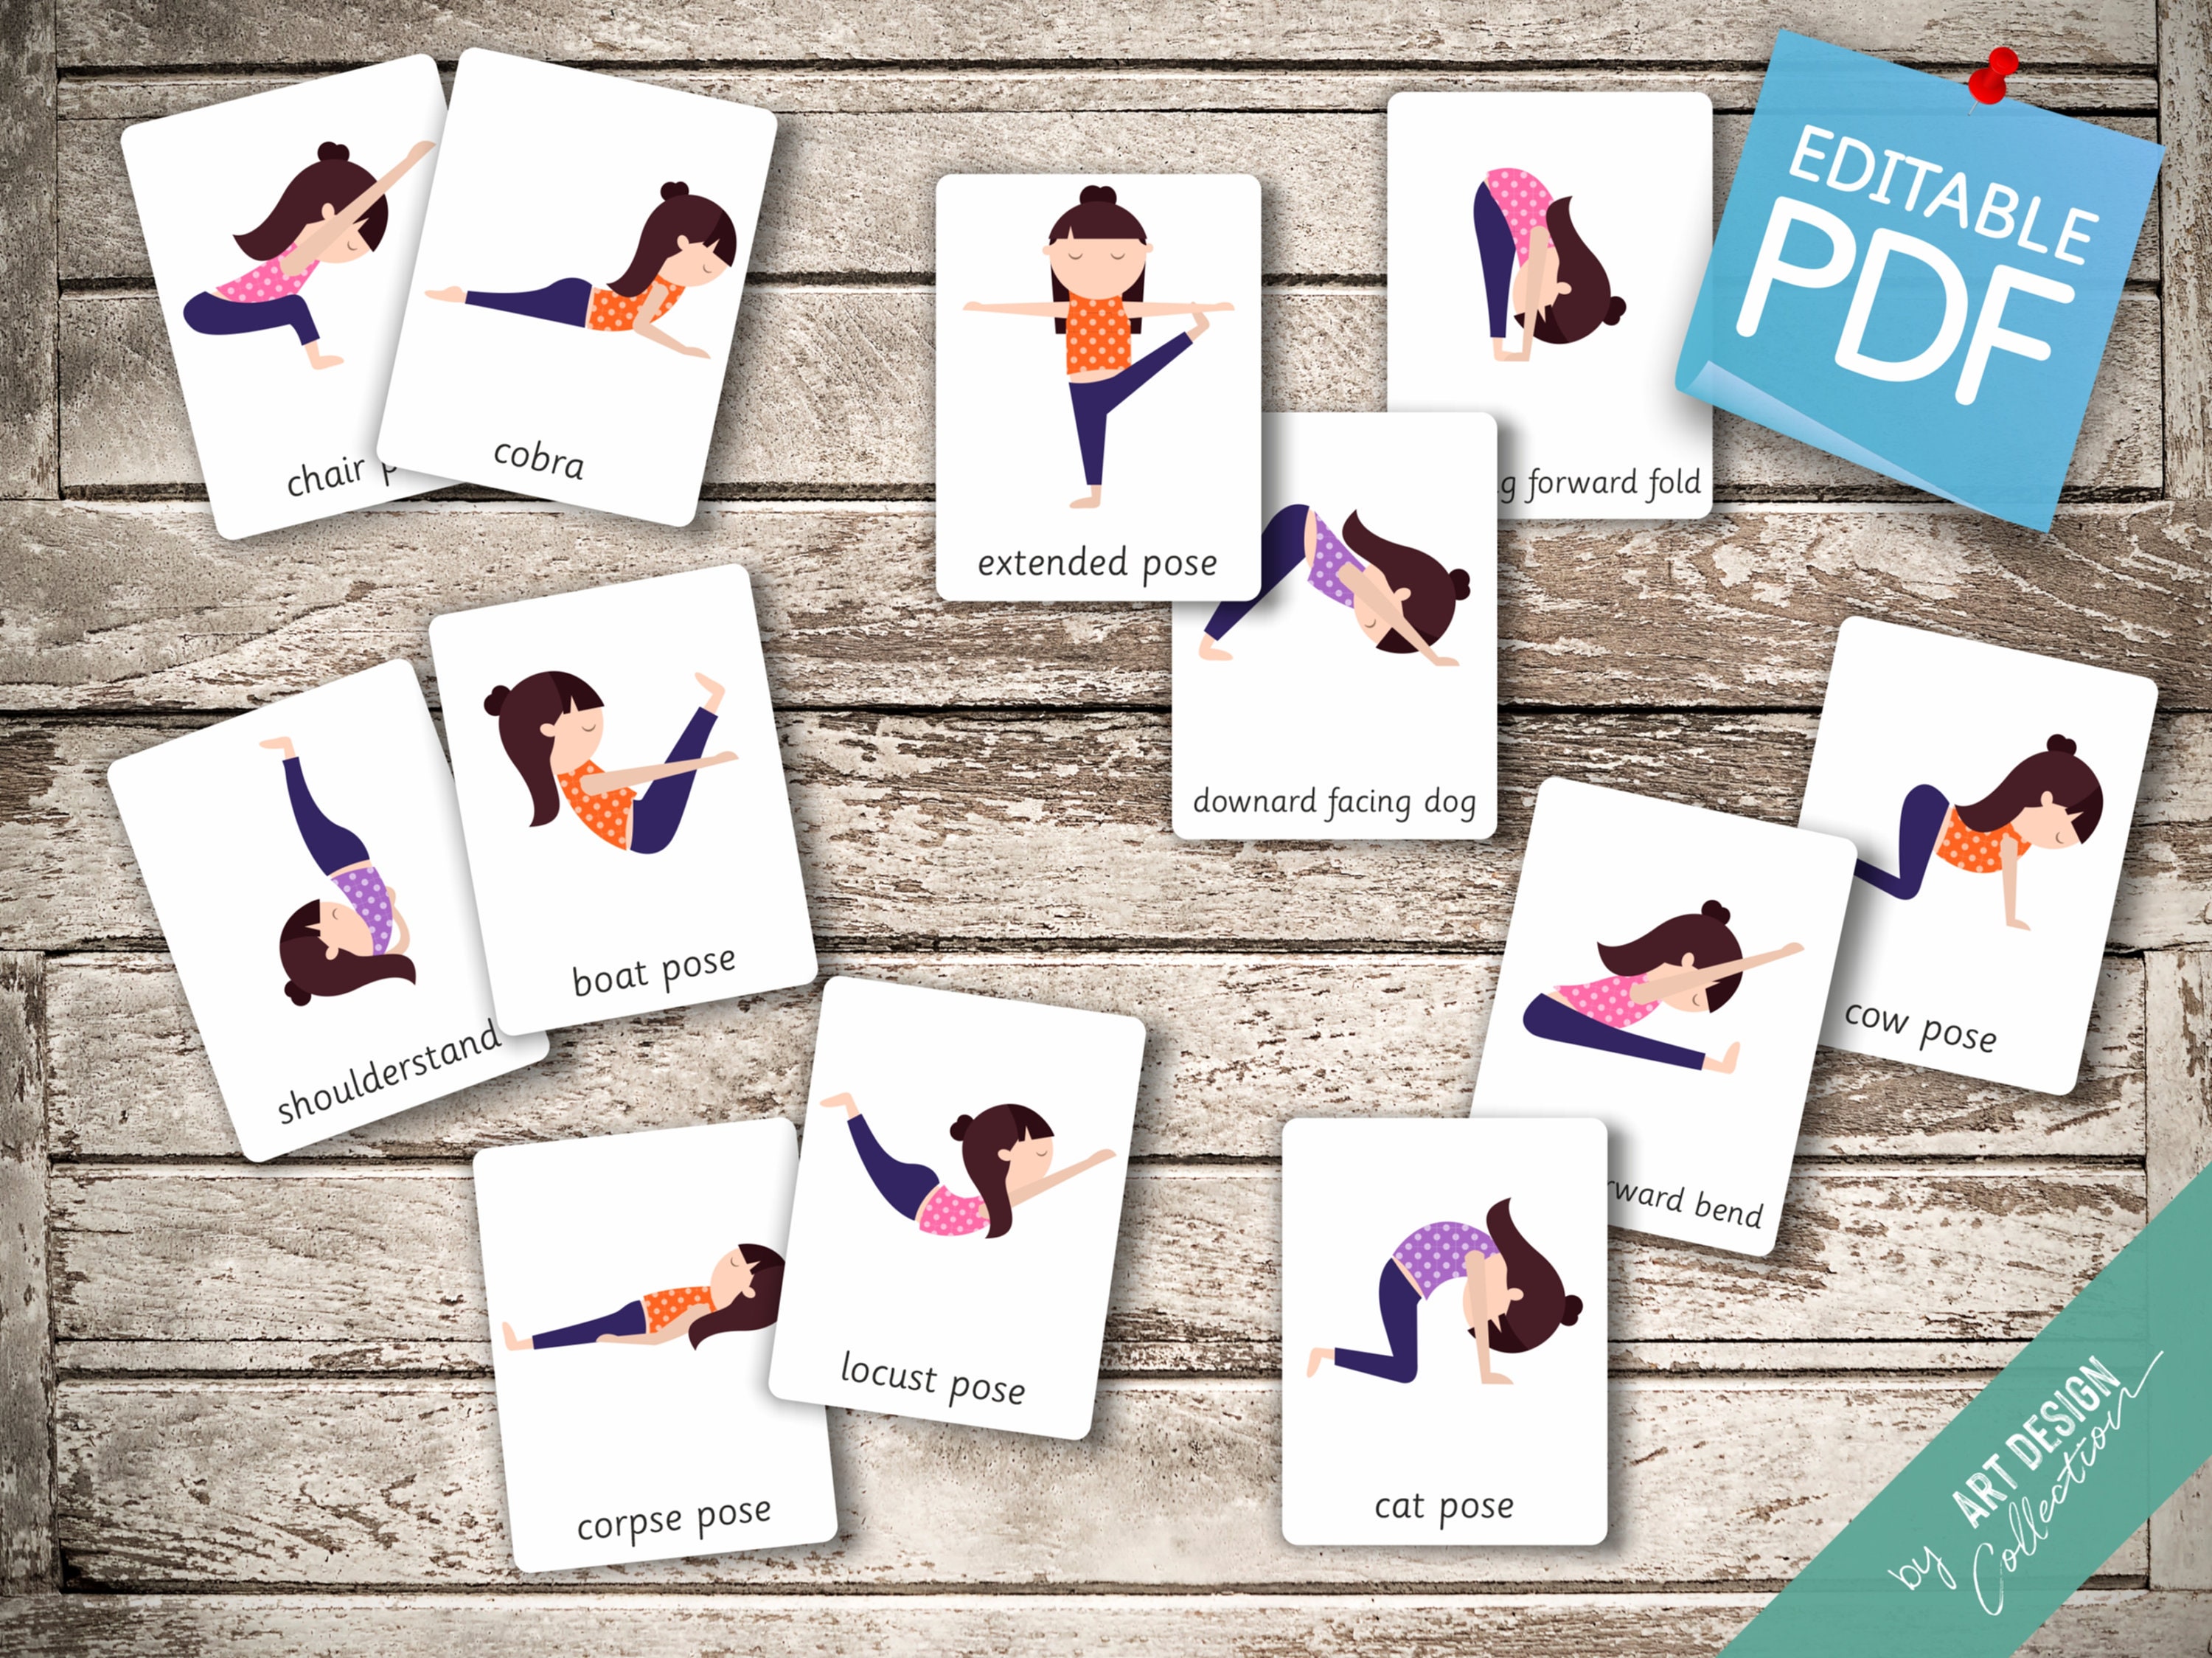 Yoga Flash Cards  Your one-stop baby shop